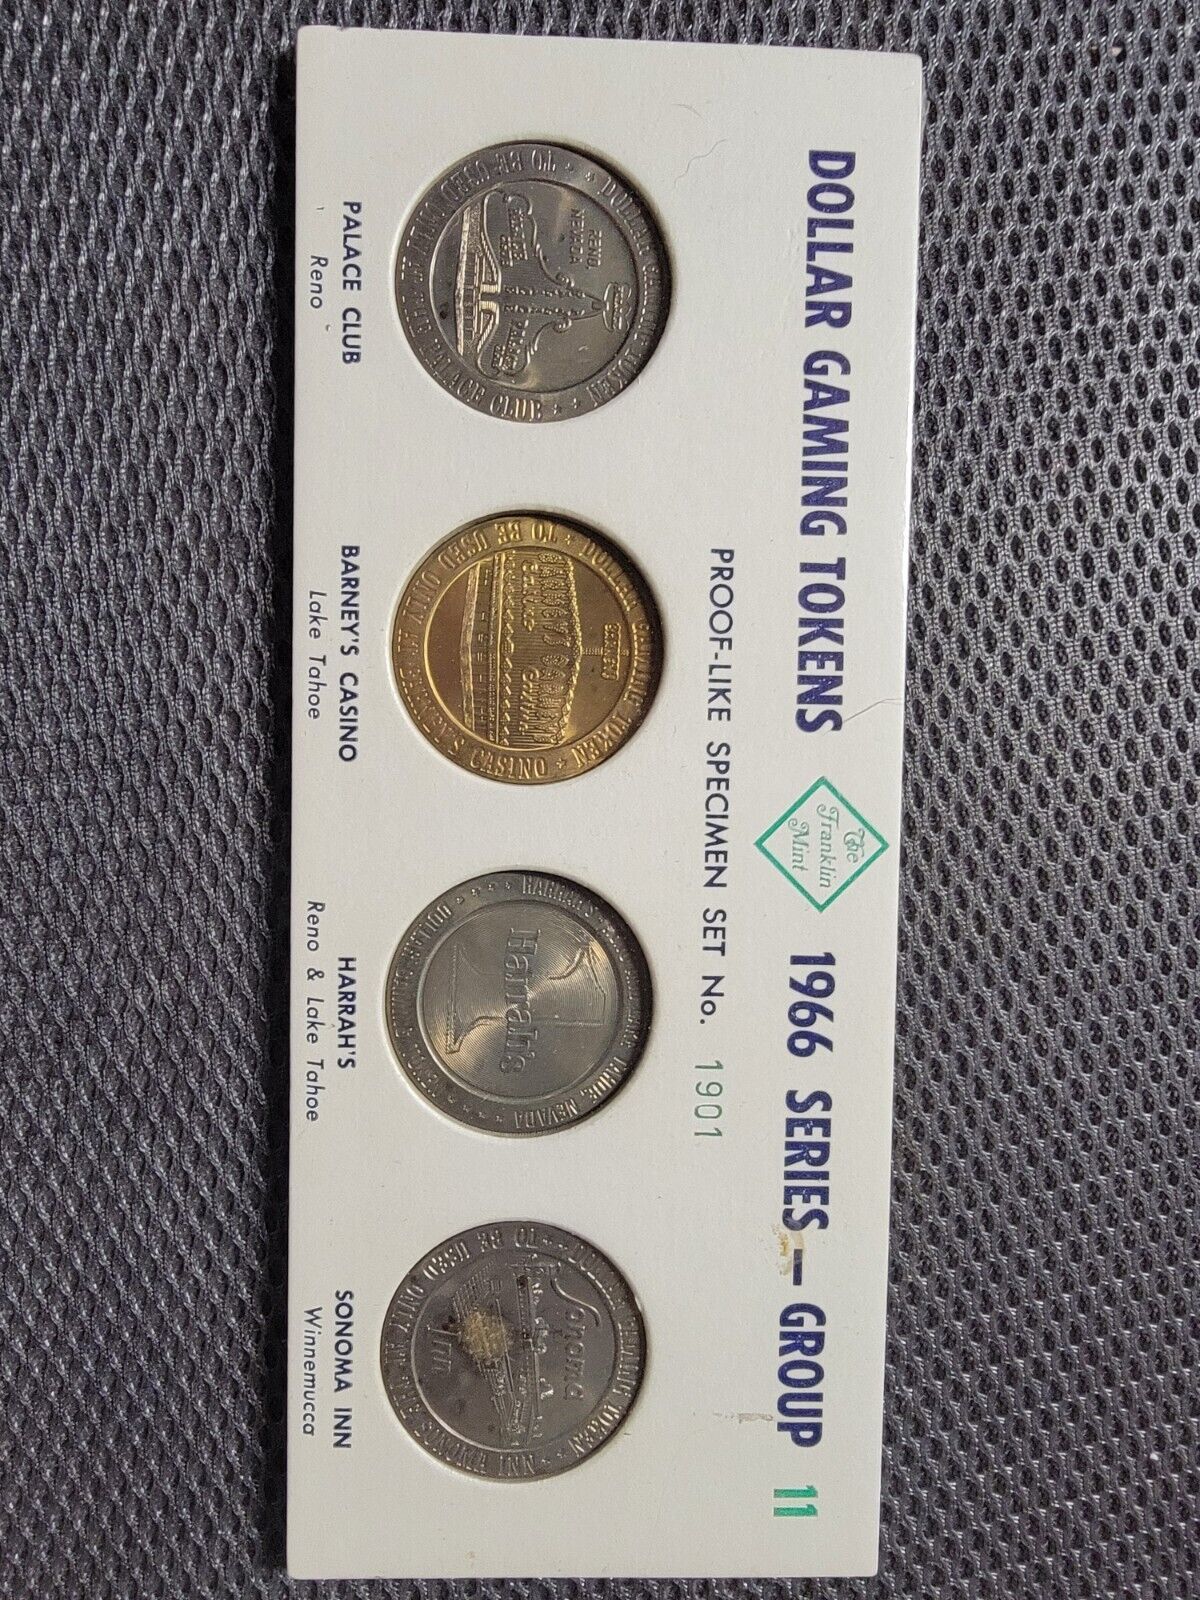 1966 FRANKLIN MINT PROOF-LIKE DOLLAR GAMING TOKENS SERIES GROUP 11 (Set 1901)